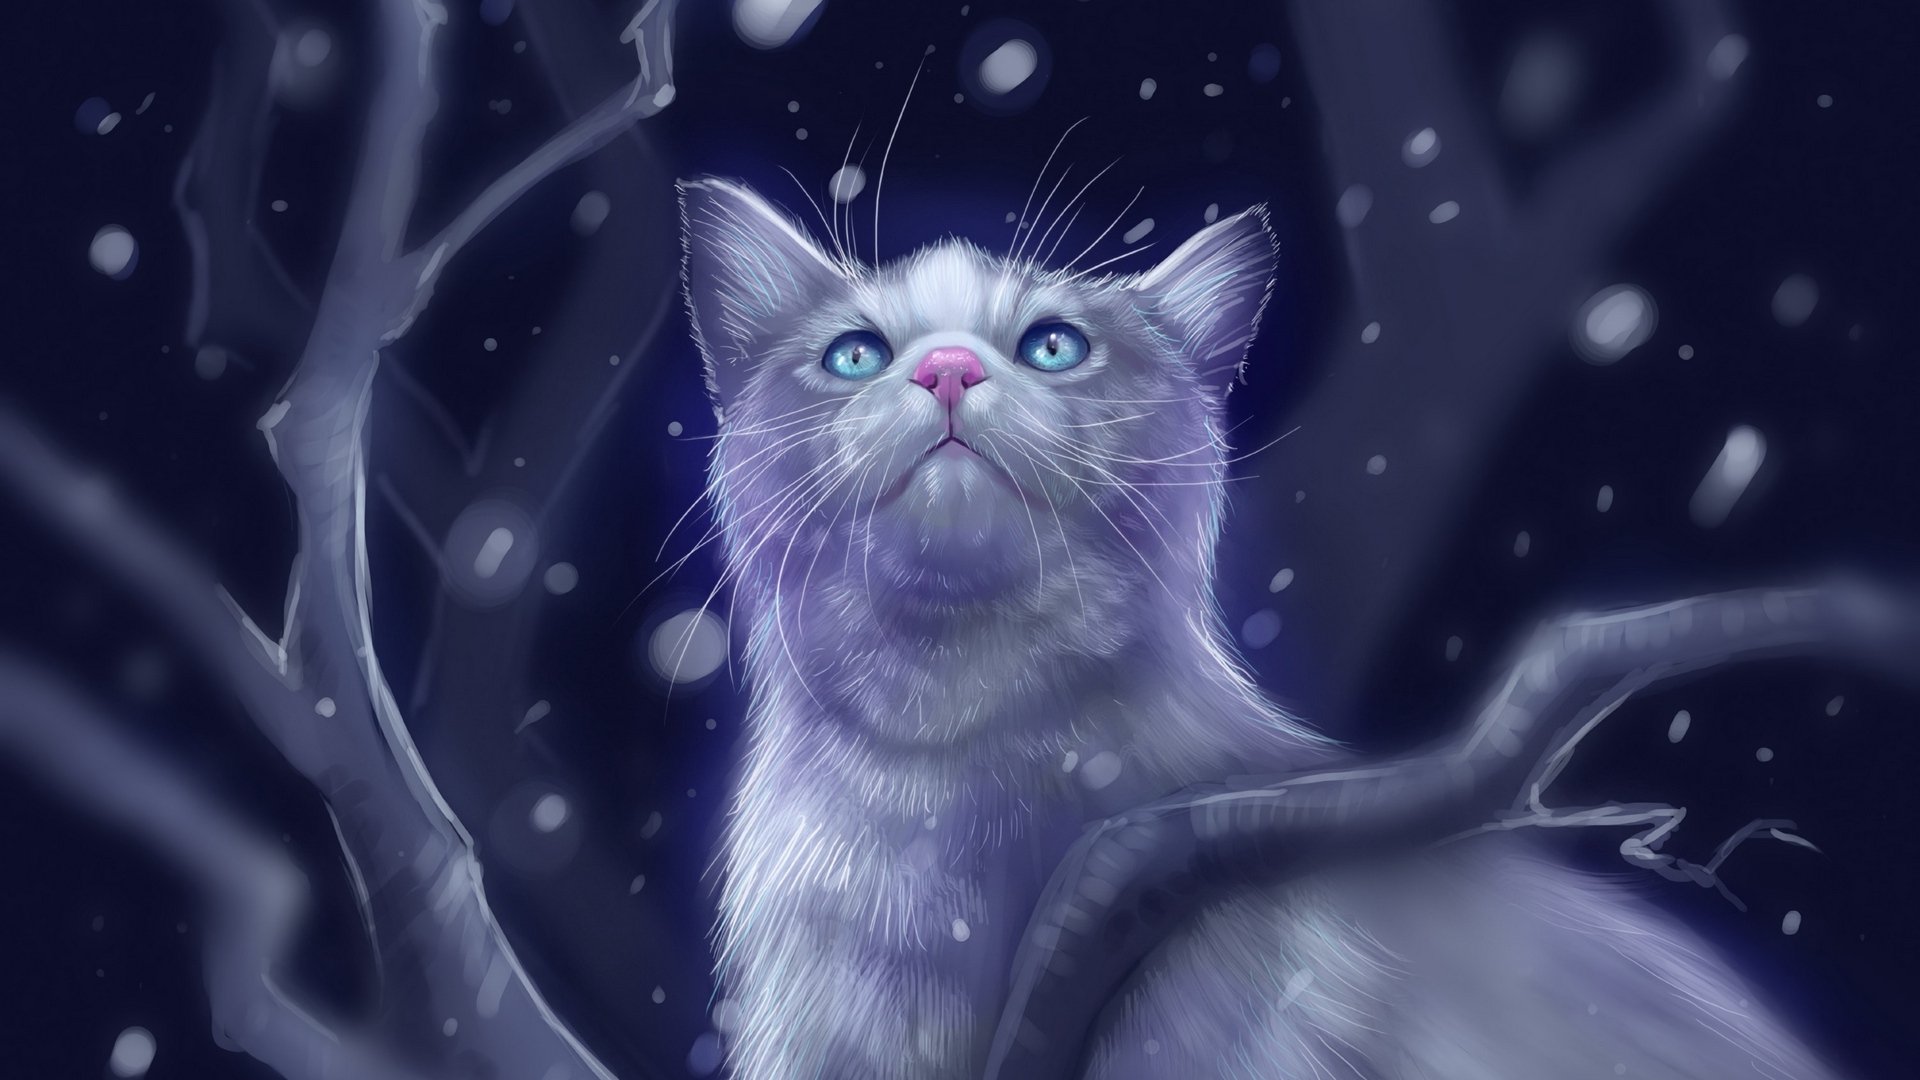 Cat Looking up at the Starry Sky by Followthepaws